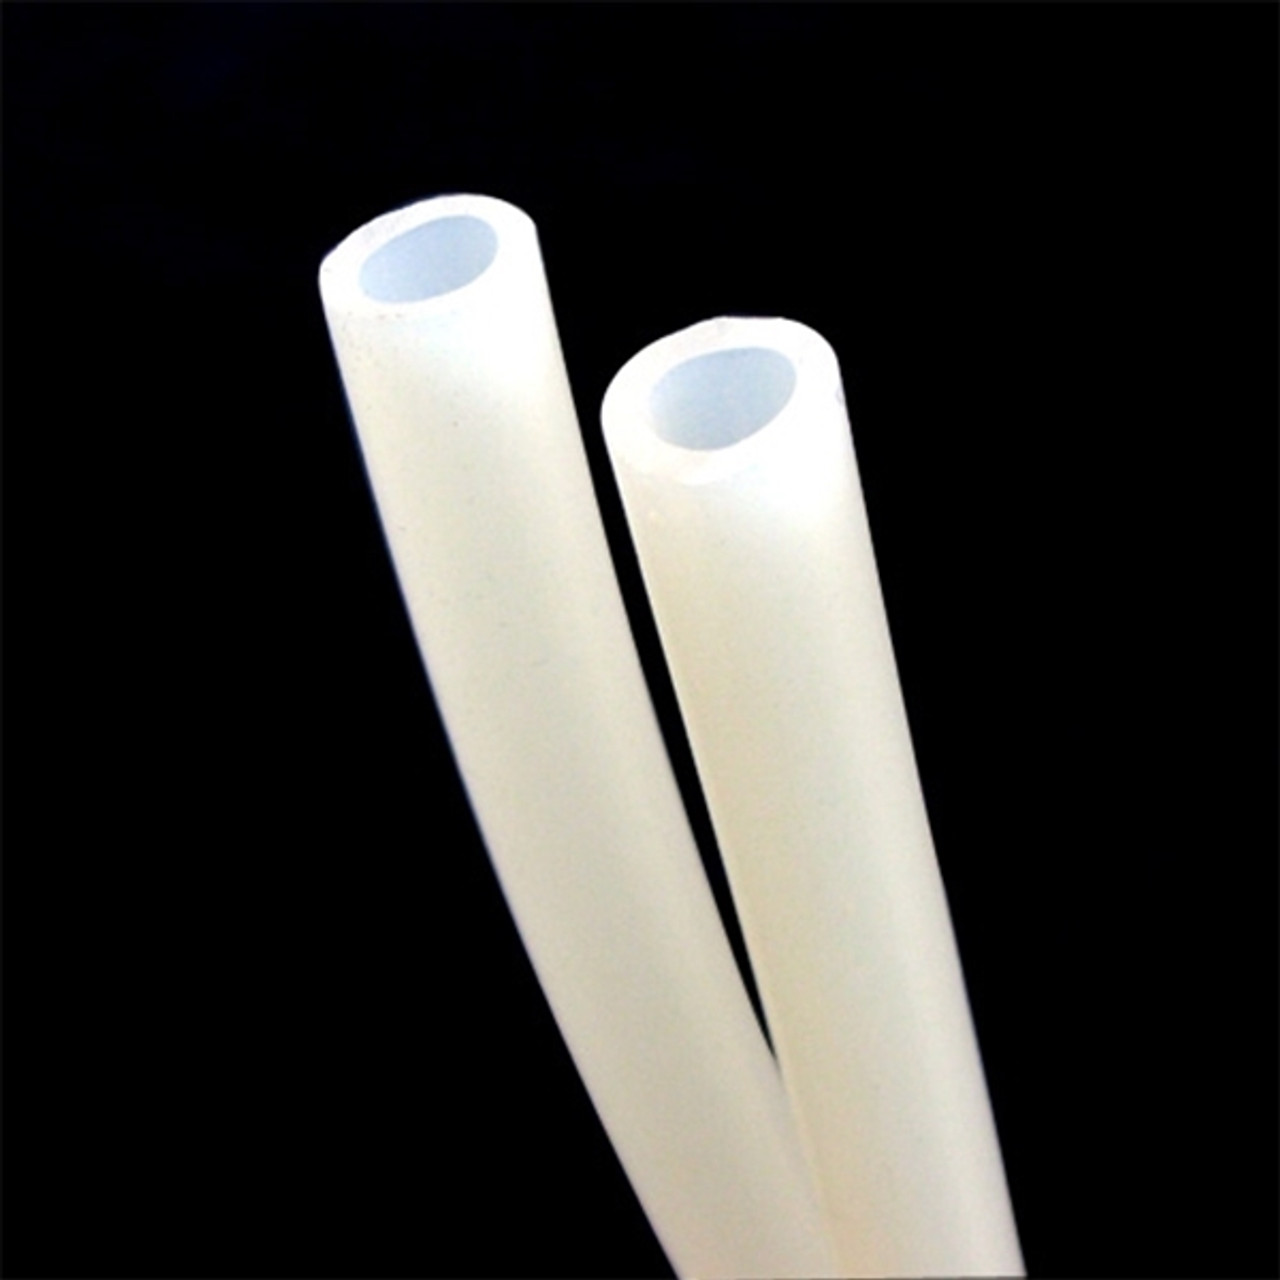 4X7 Silicone Flex Tube for CO2 Water Cooling - LightObject